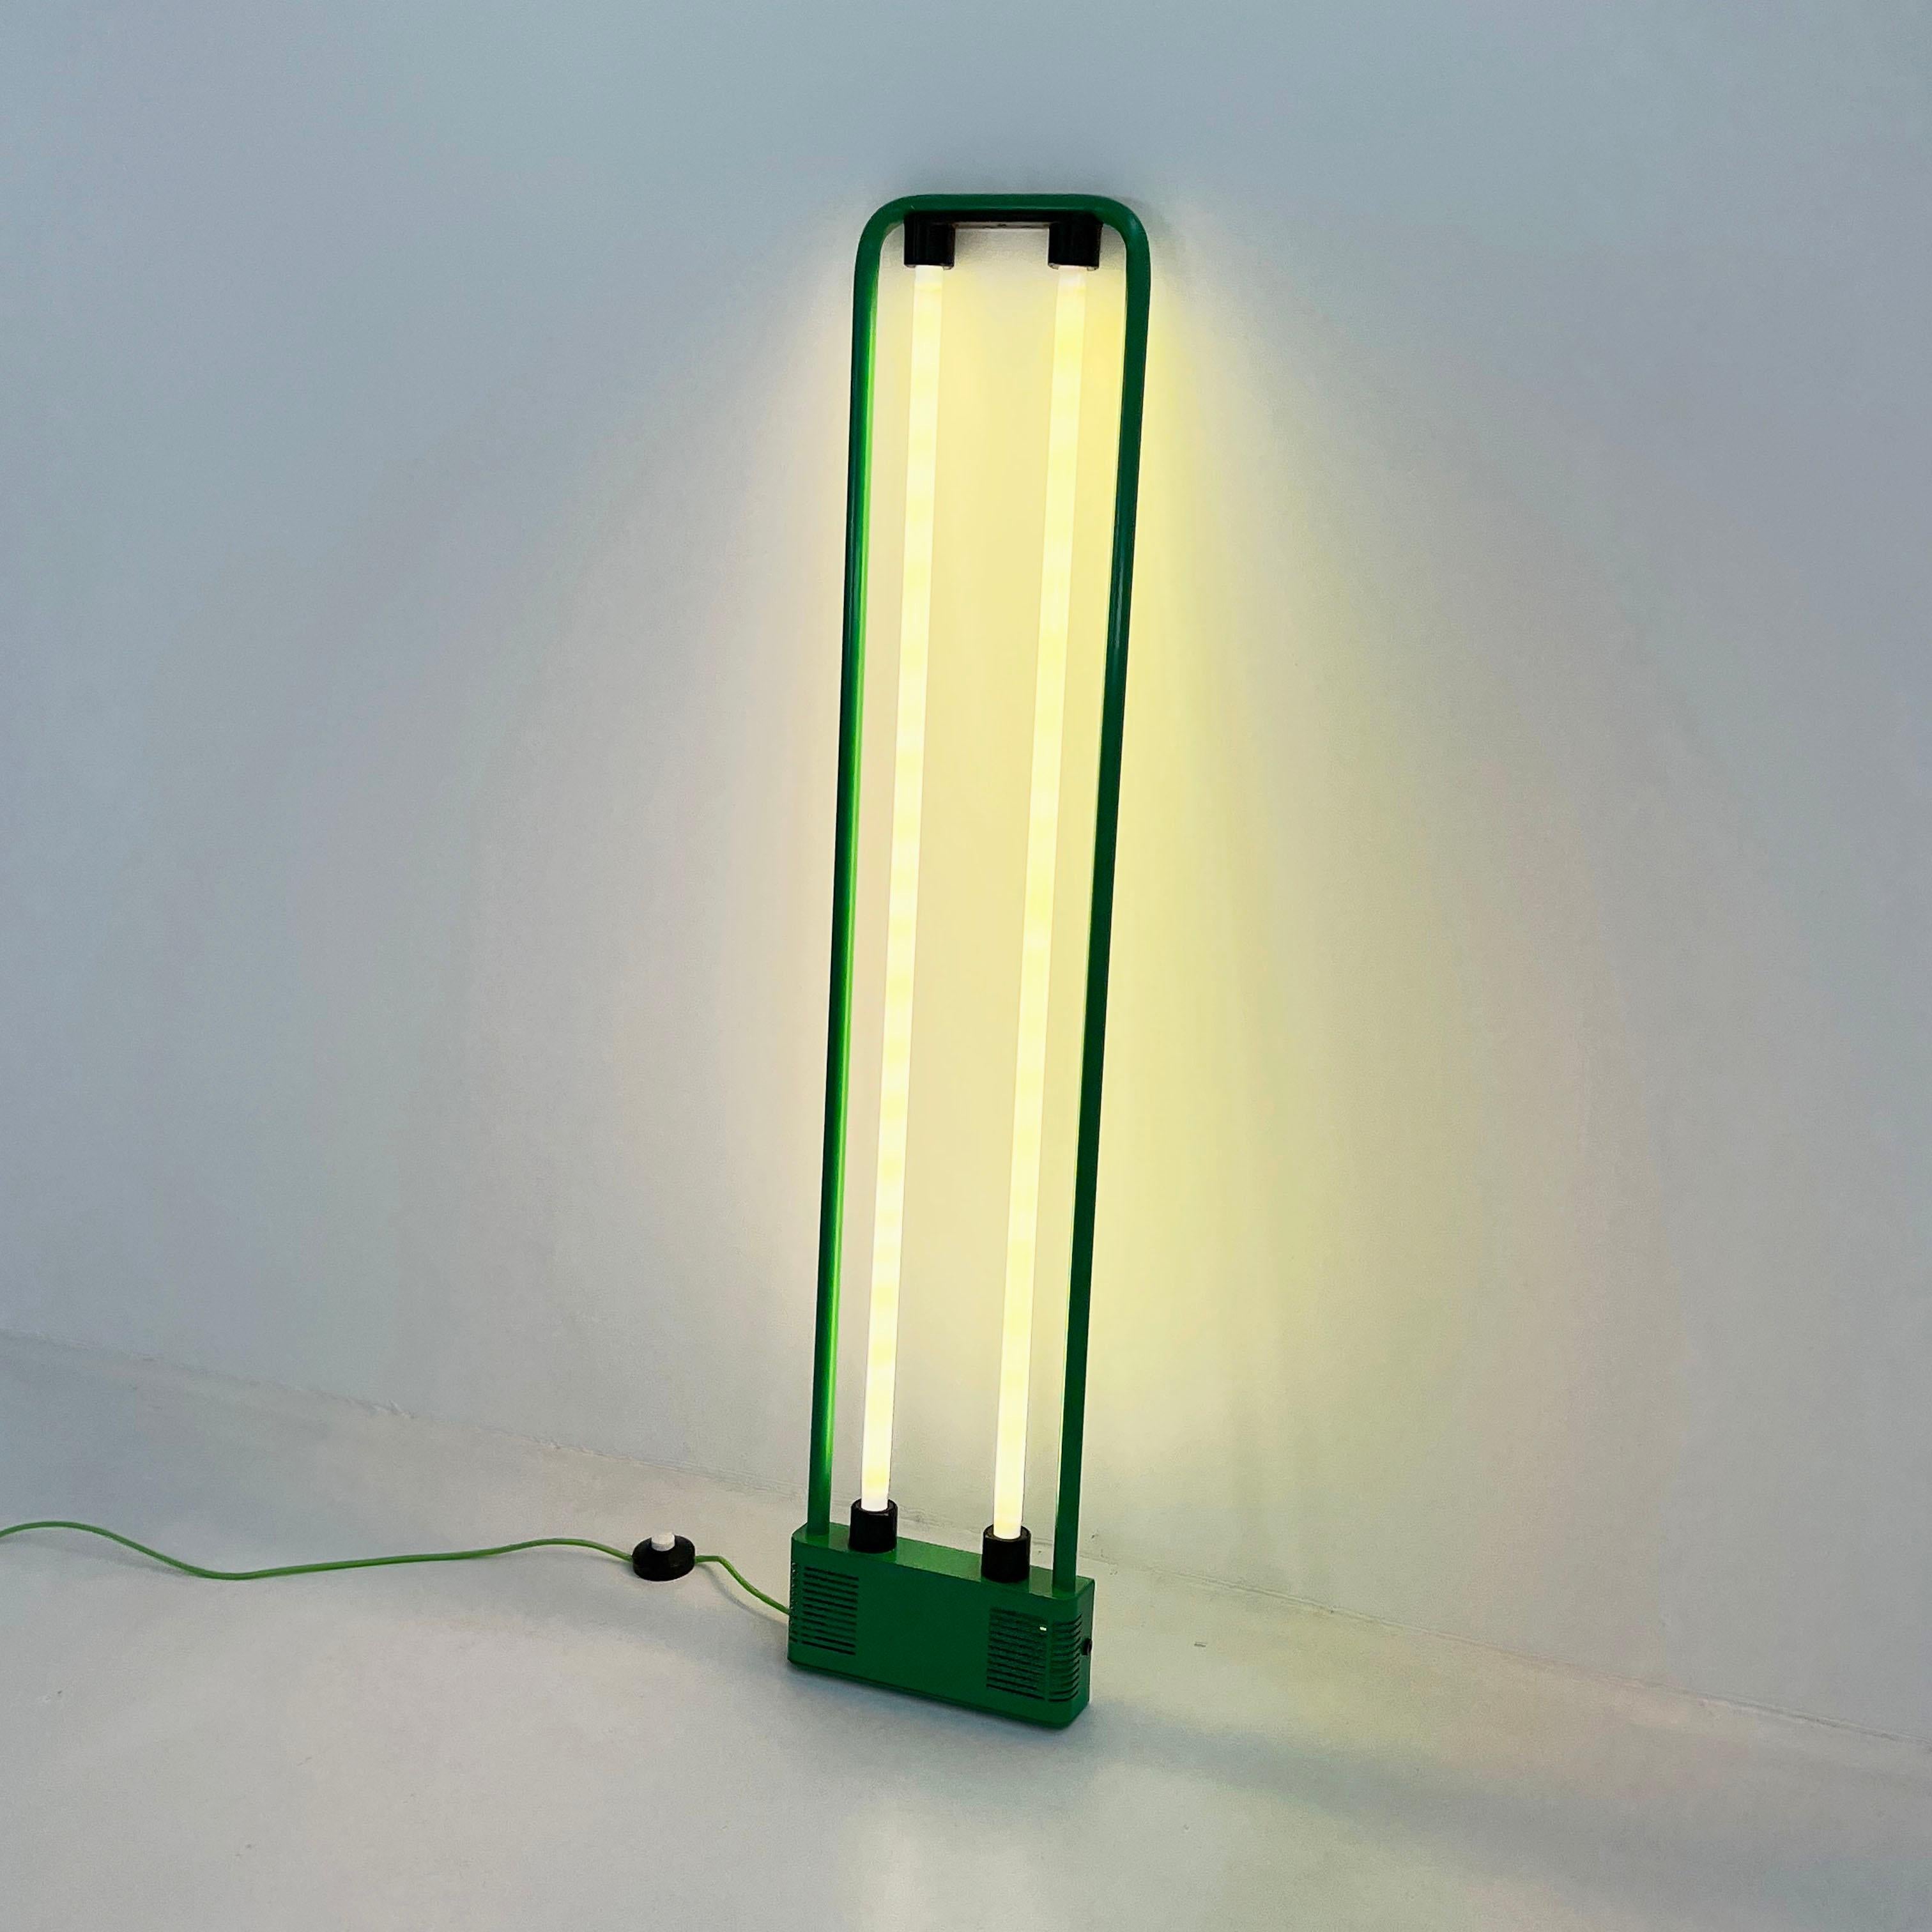 Designer - Gian N. Gigante
Producer - Zerbetto
Design Period - Eighties
Measurements - Width 30 cm x Depth 6 cm x Height 140 cm
Materials - Metal 
Color - Green
Light wear consistent with age and use. 